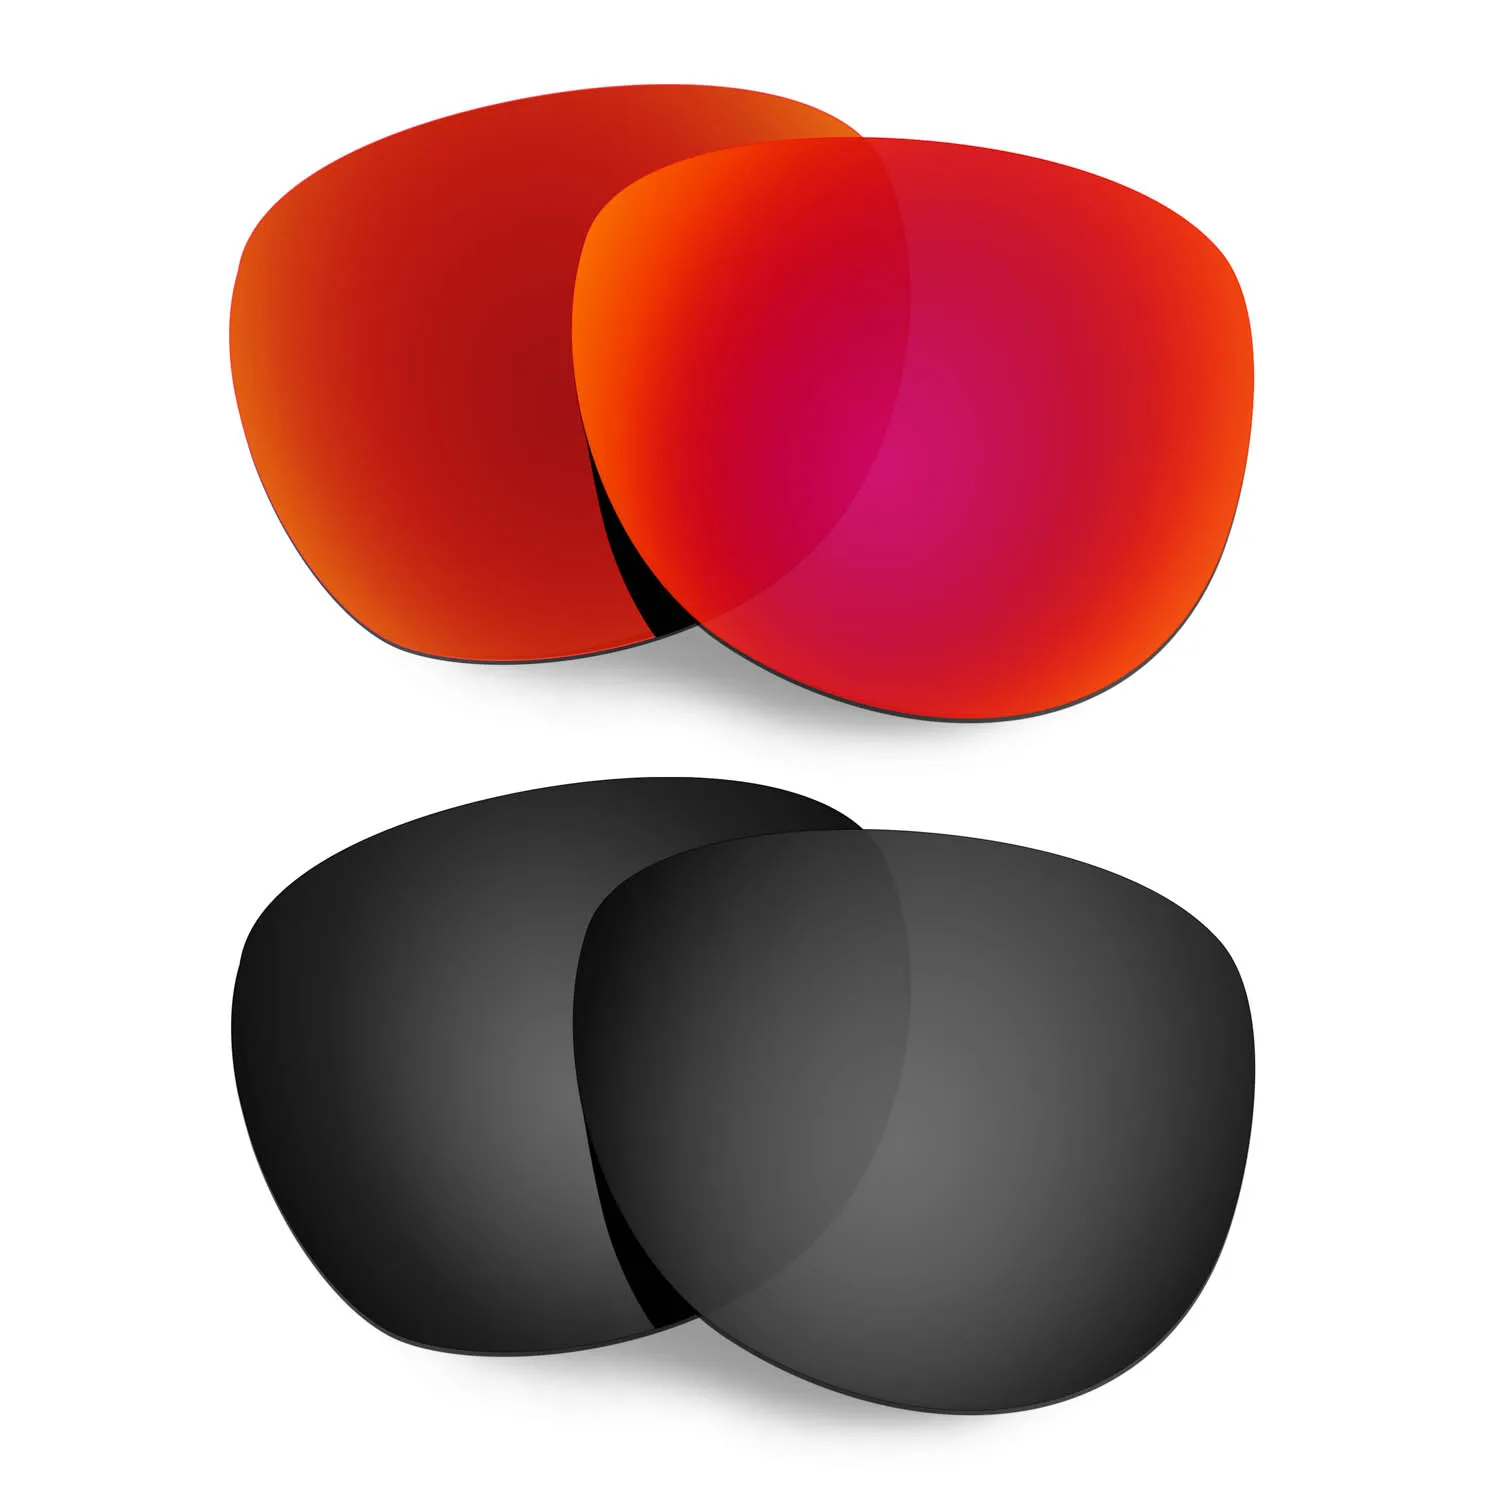 

HKUCO Polarized Replacement Lenses For Stringer Sunglasses Red/Black 2 Pairs